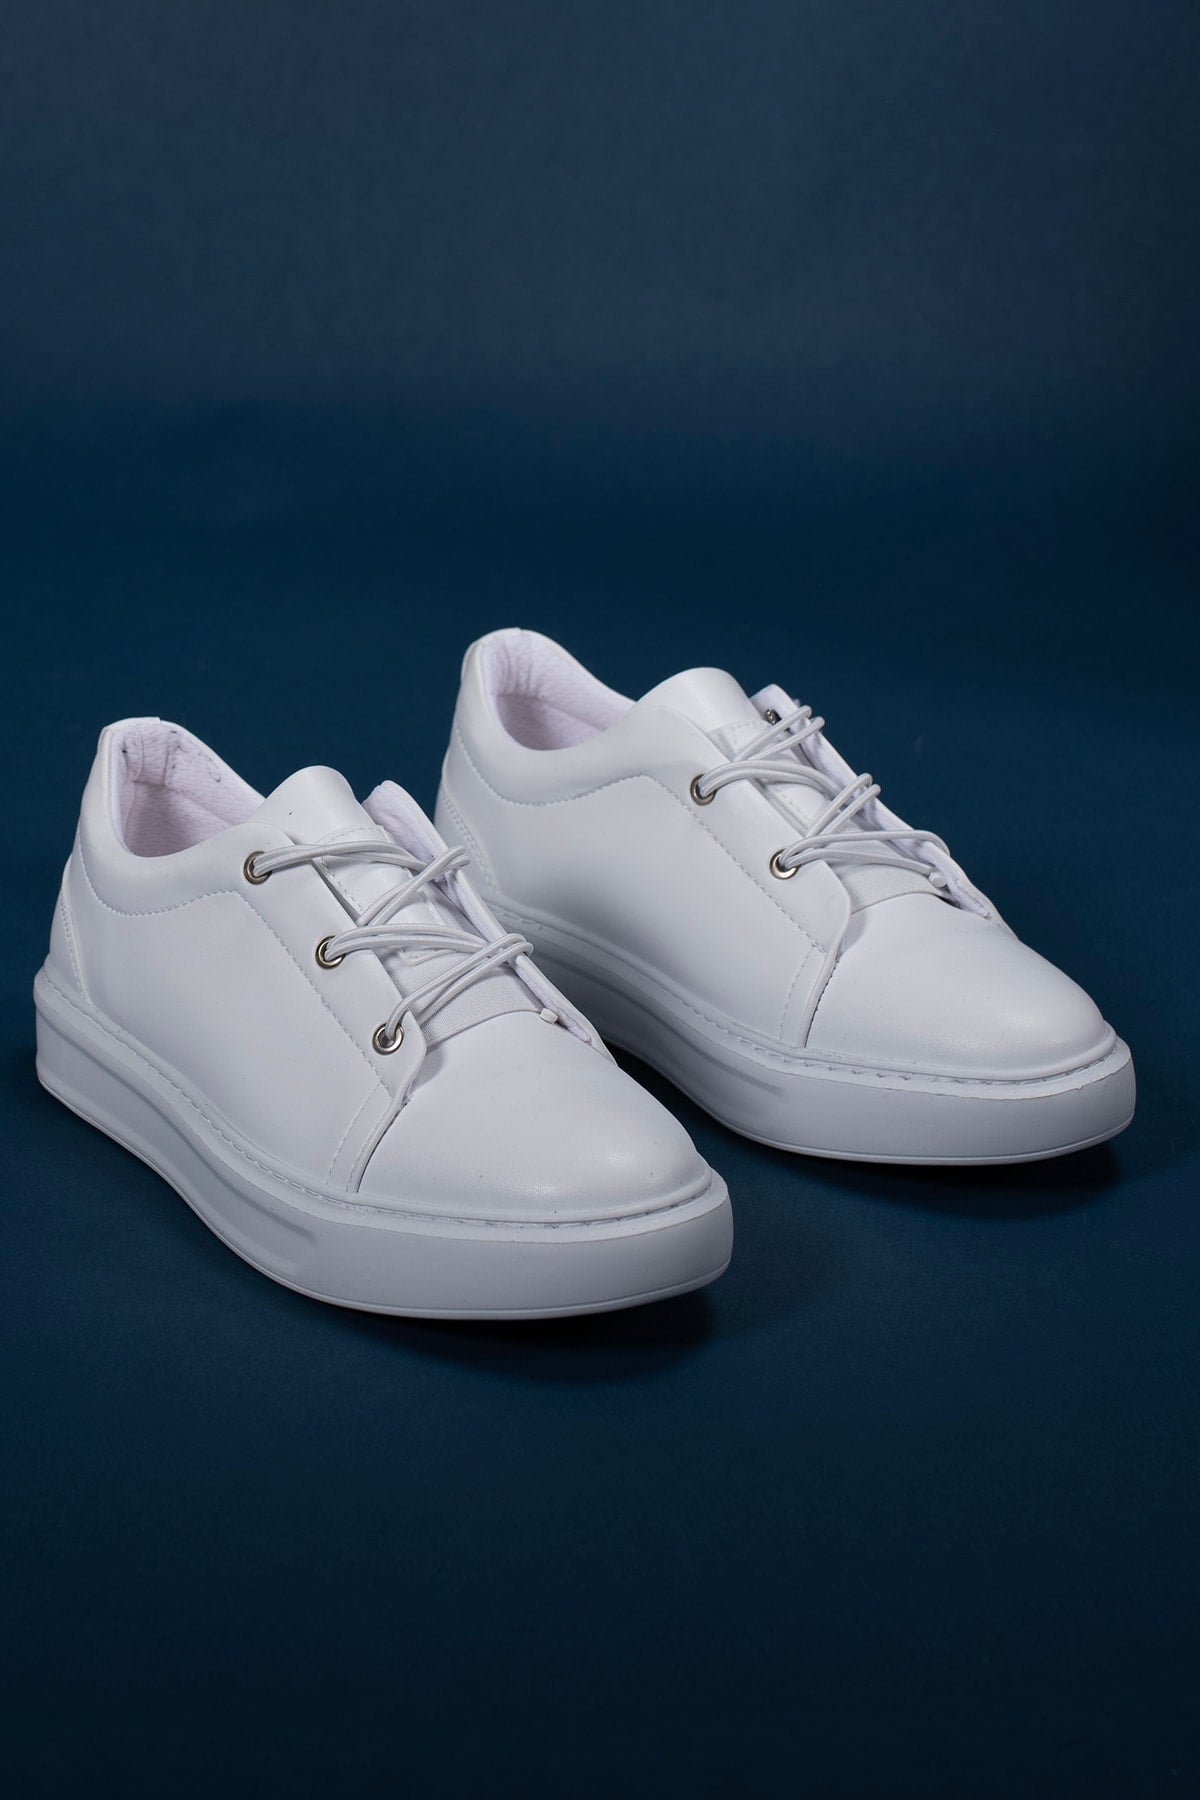 Men's Casual Shoes 0012581 White